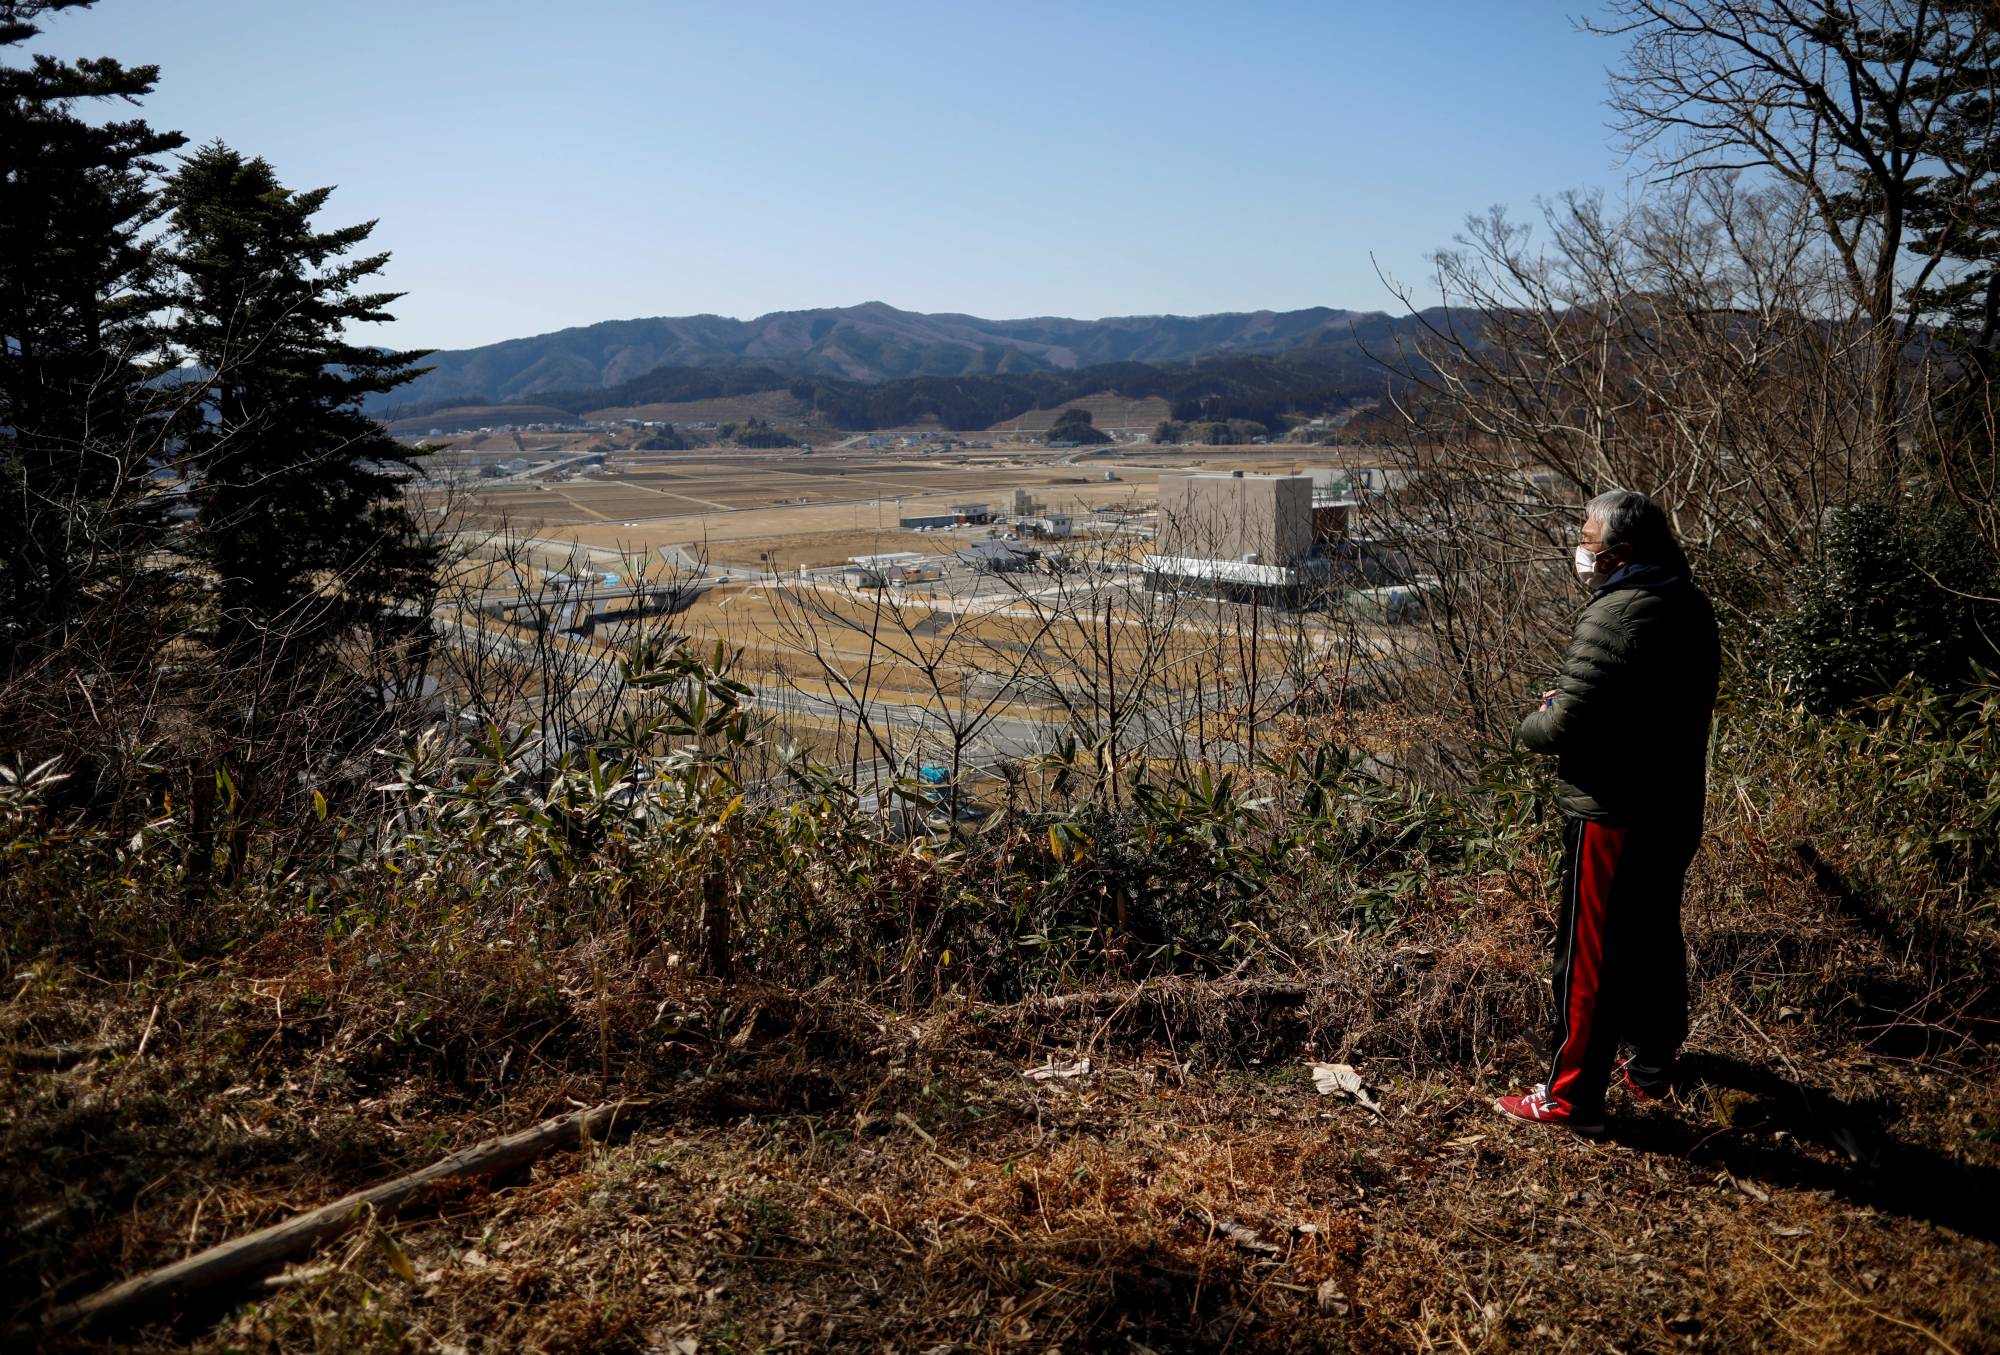 Kazuyoshi Sasaki looks at the former residential area which was devastated by the disaster, near the grave of his late wife ahead of the 10th anniversary the March 11 disaster, in Rikuzentakata, Iwate Prefecture | REUTERS